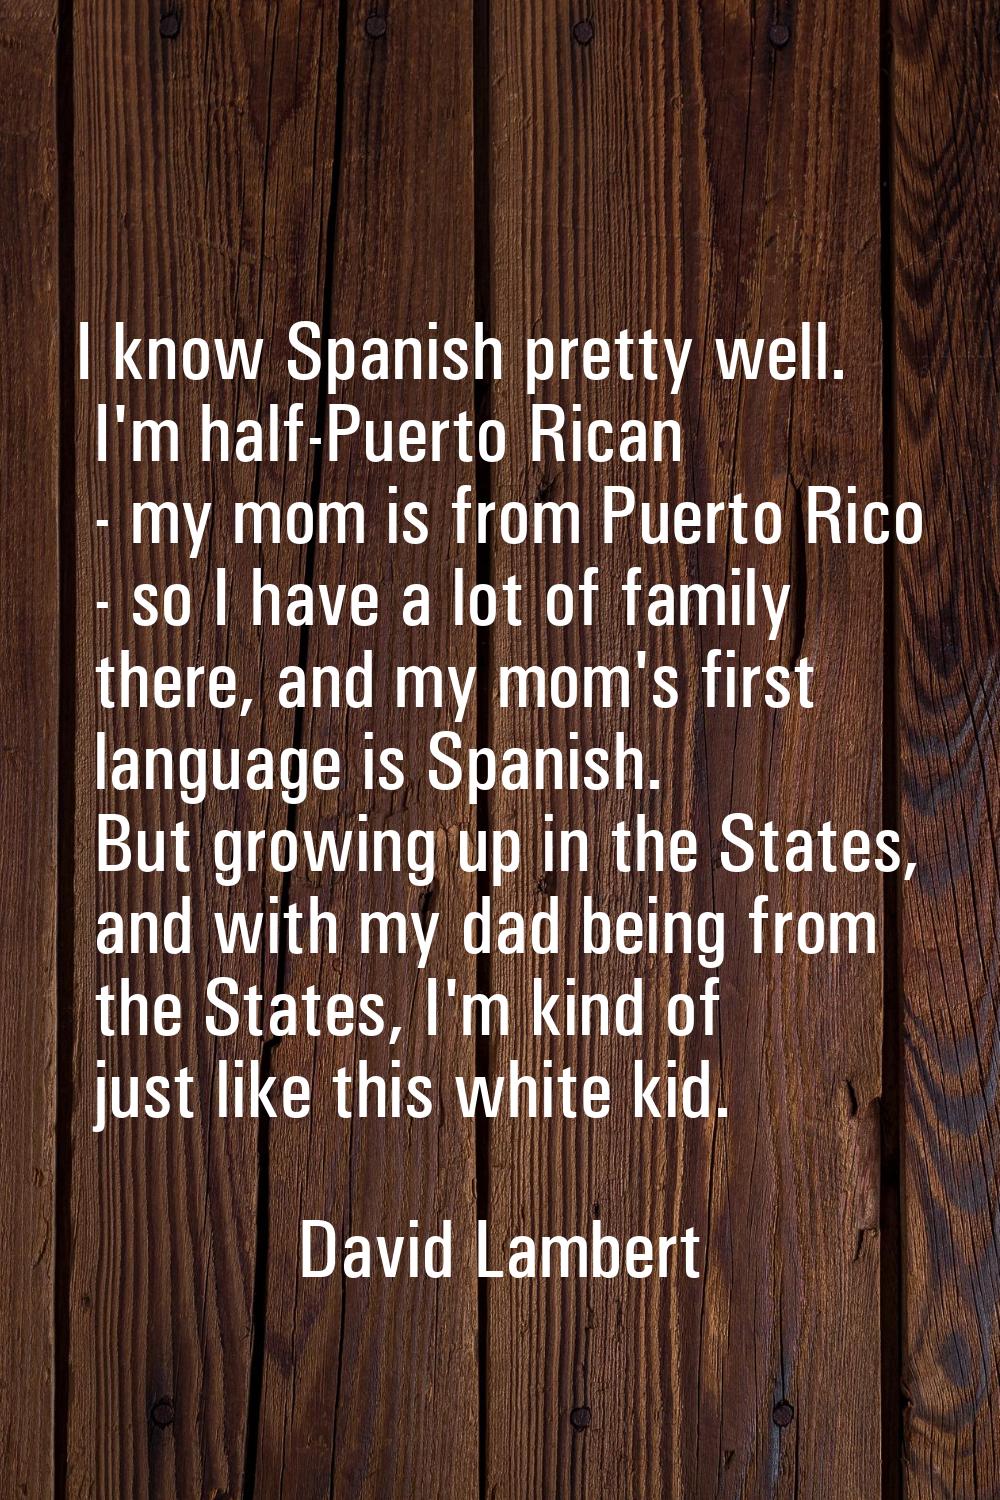 I know Spanish pretty well. I'm half-Puerto Rican - my mom is from Puerto Rico - so I have a lot of